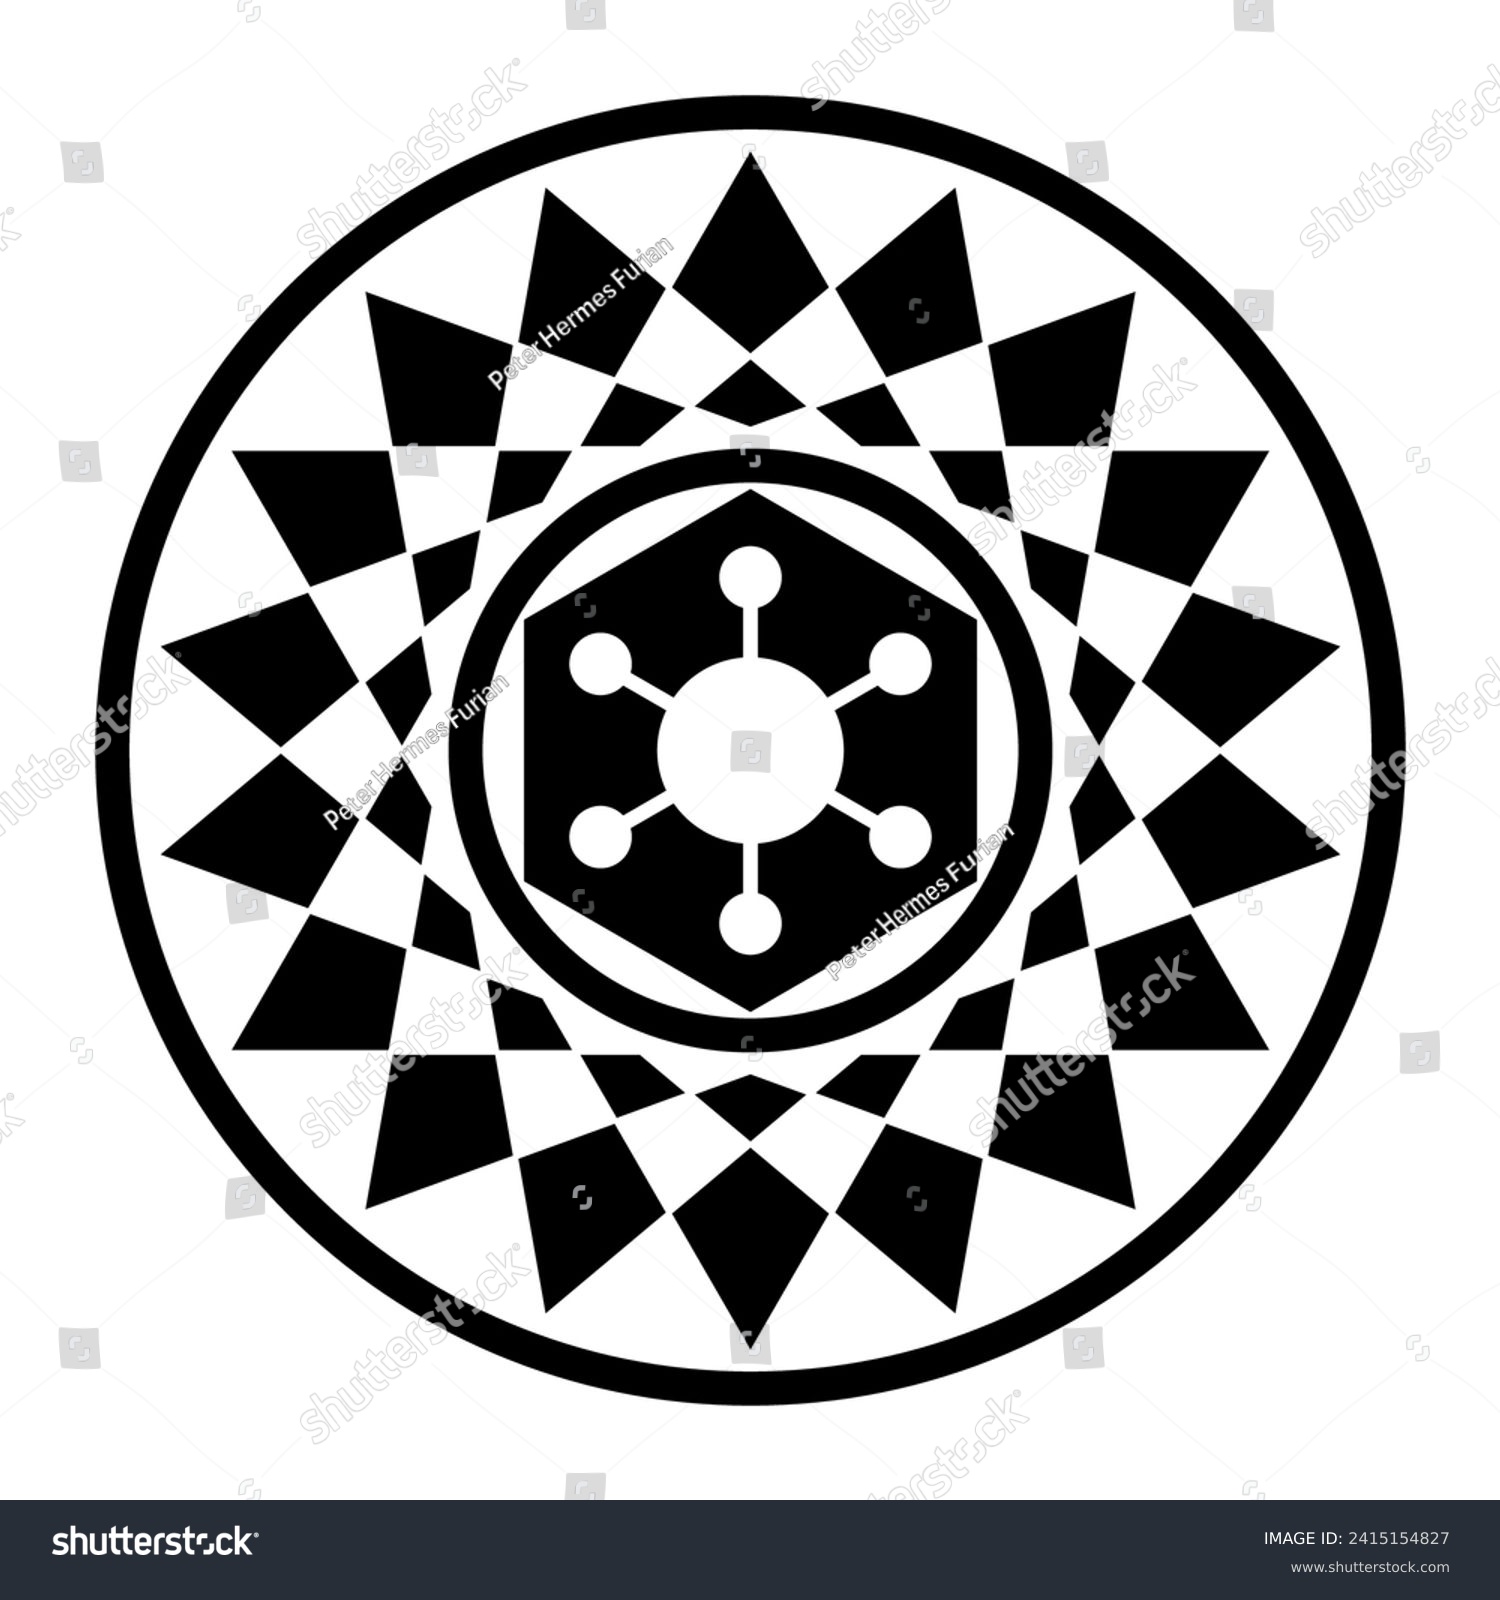 SVG of Hexagram shaped crop circle pattern. Hexagonal forms in the center, surrounded by an 18-pointed star, consisting of triangles. Modeled on a corn circle pattern found 2023 near Devizes, Wiltshire. svg